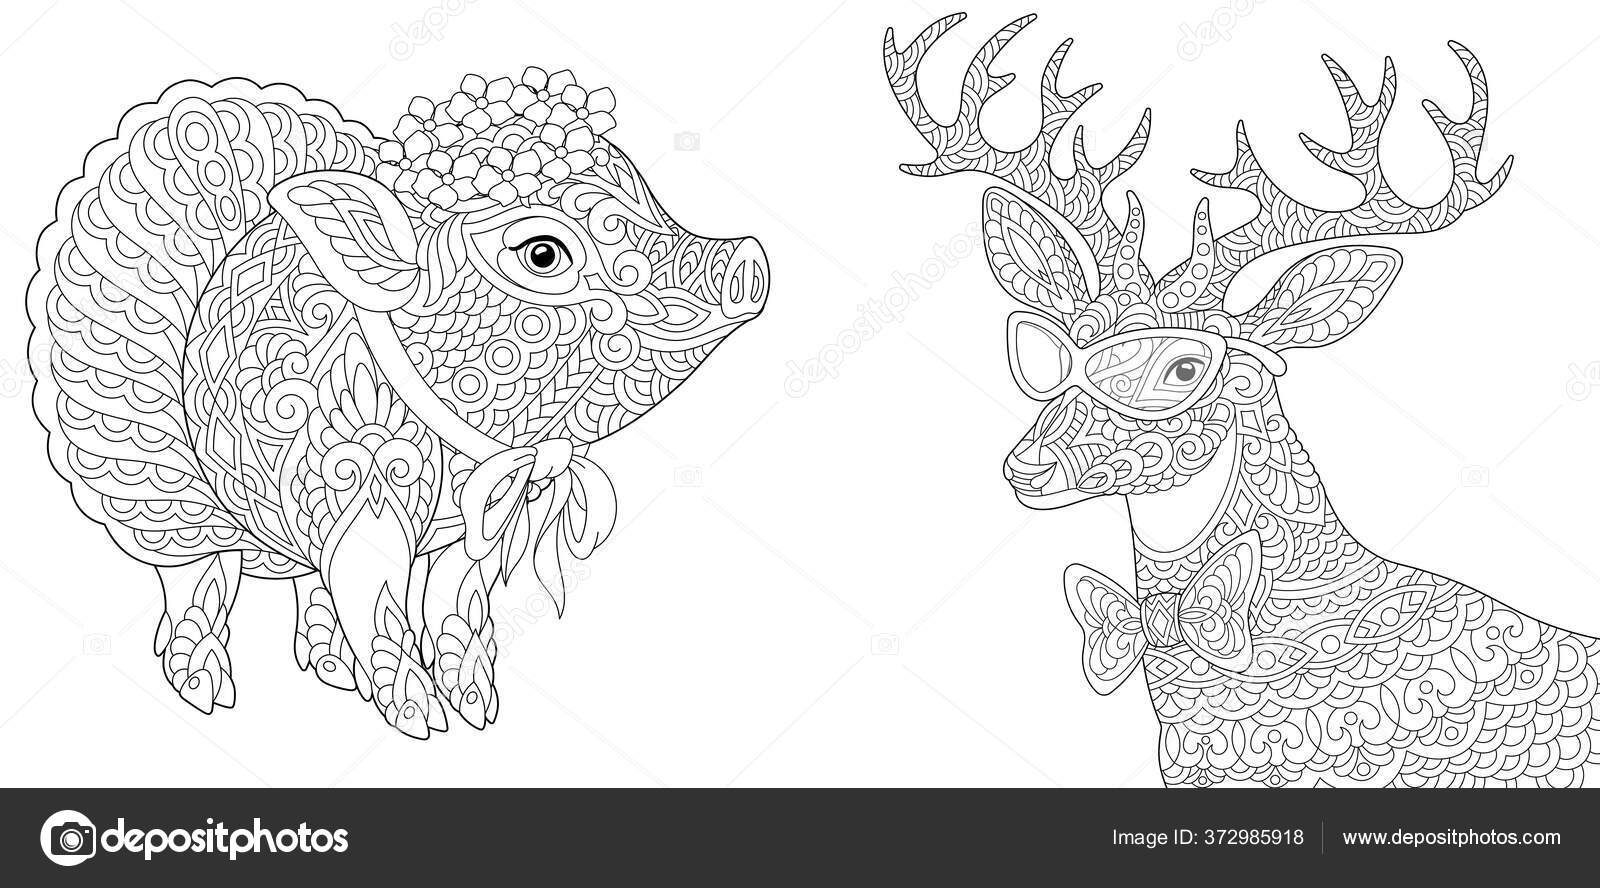 Adult coloring book page a cute pig image Vector Image